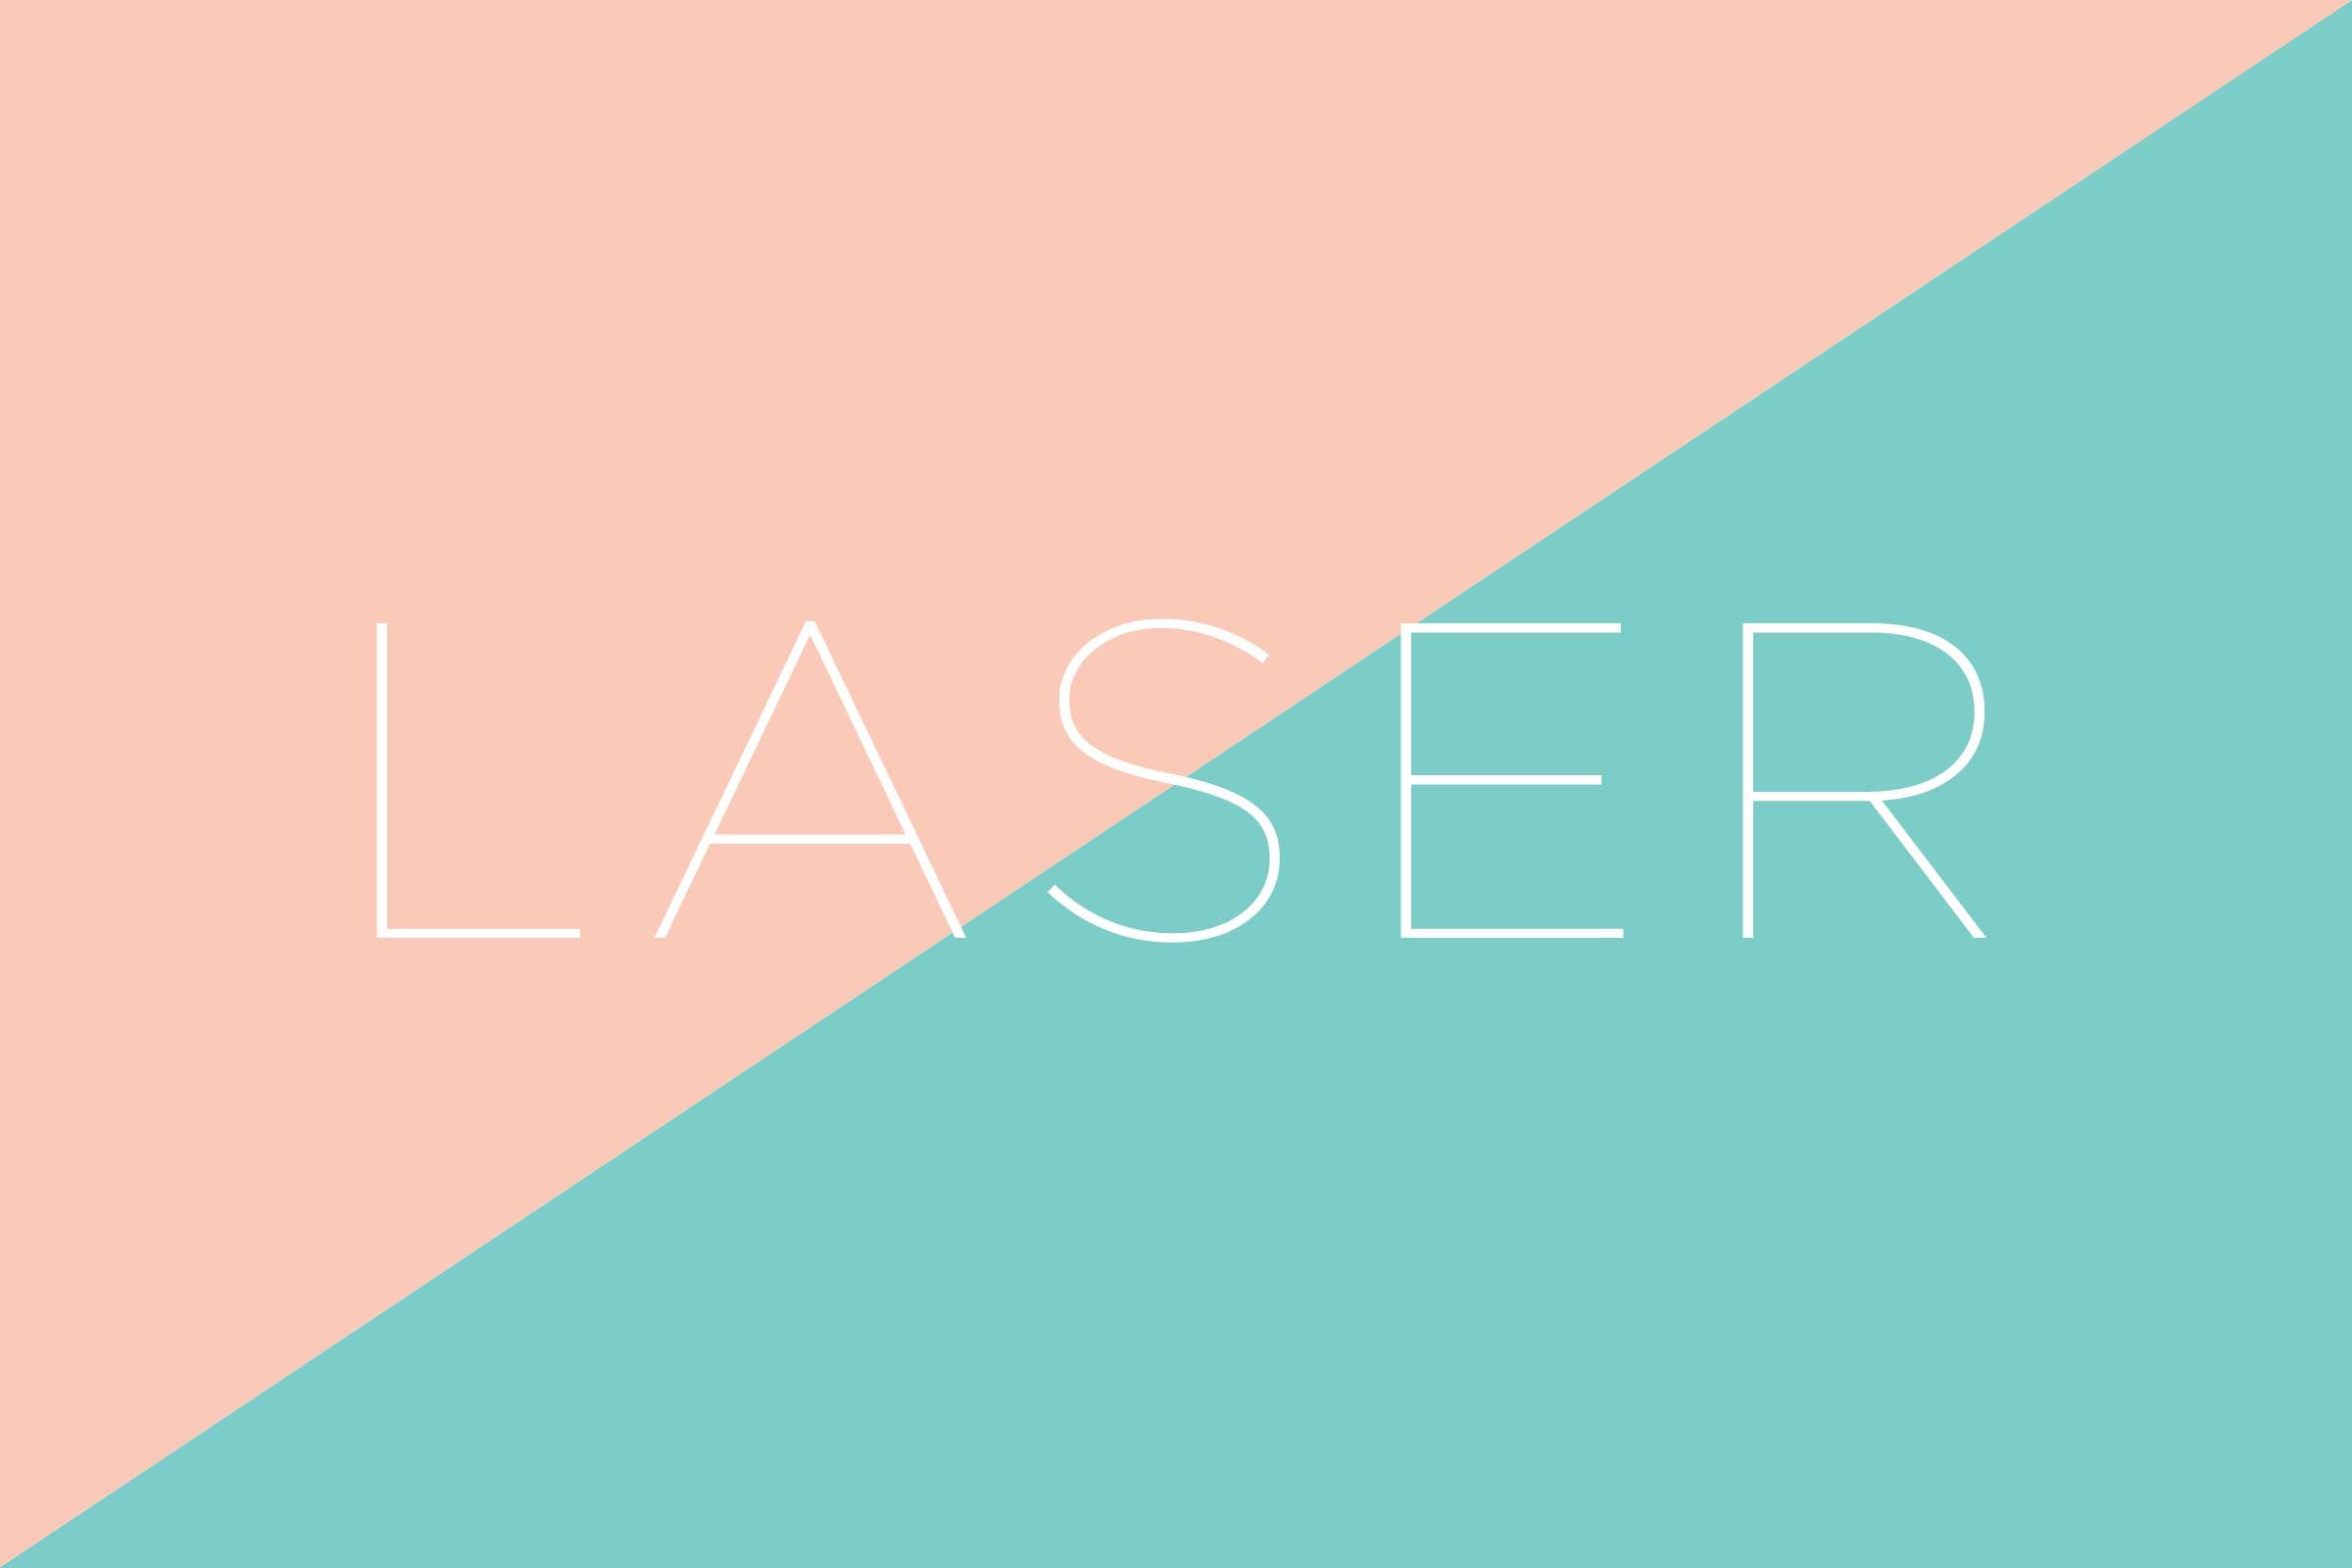 what does the word laser stand for